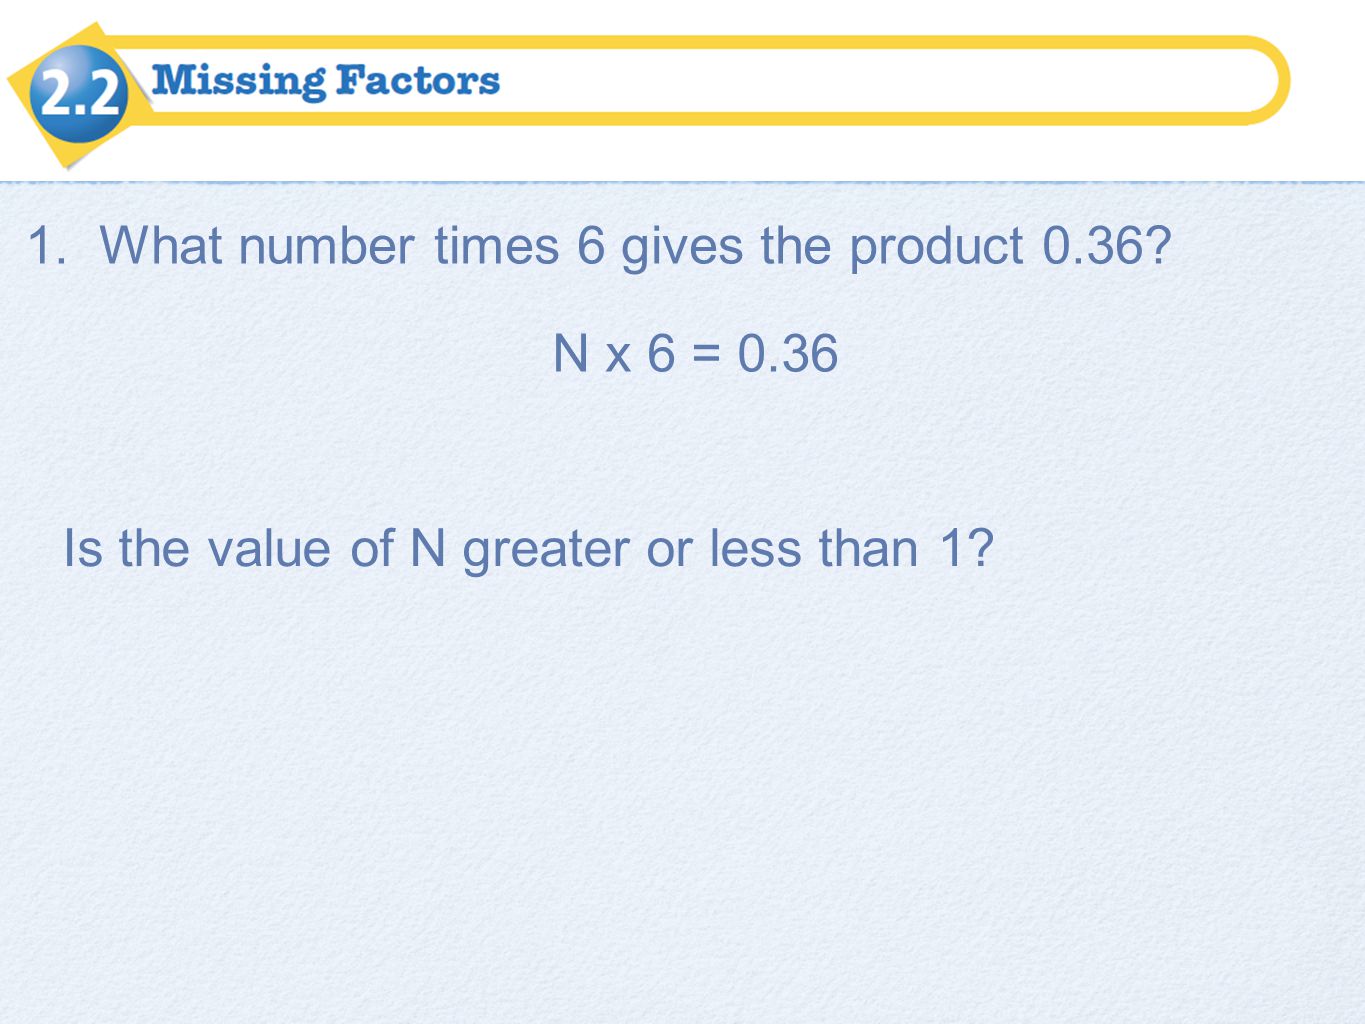 1. What number times 6 gives the product 0.36